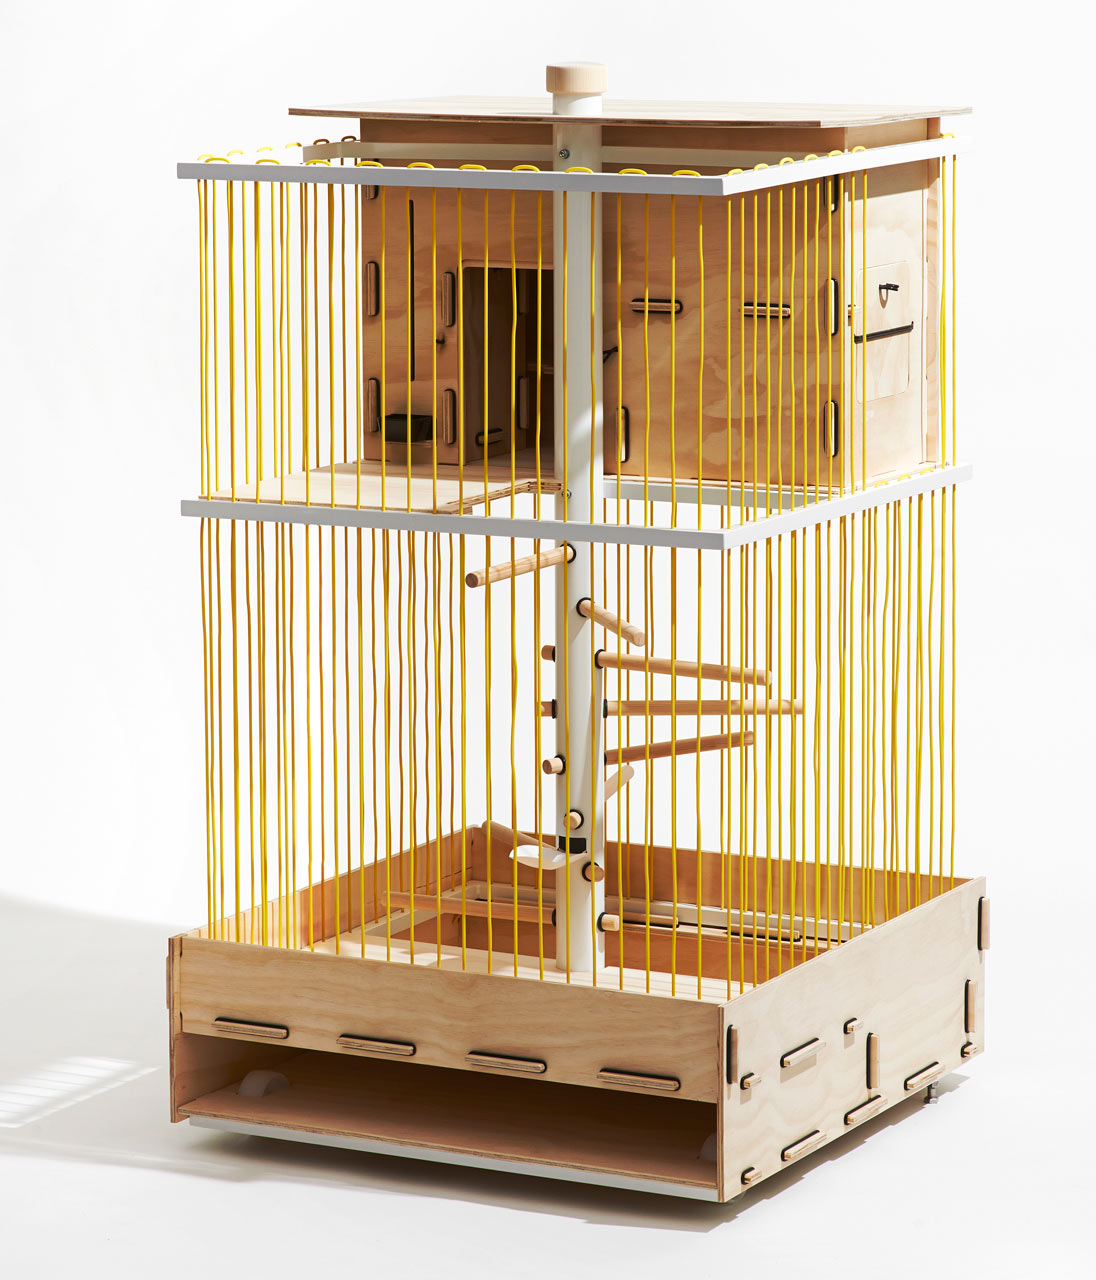 Raise Chickens in the City with This Urban Chicken Coop